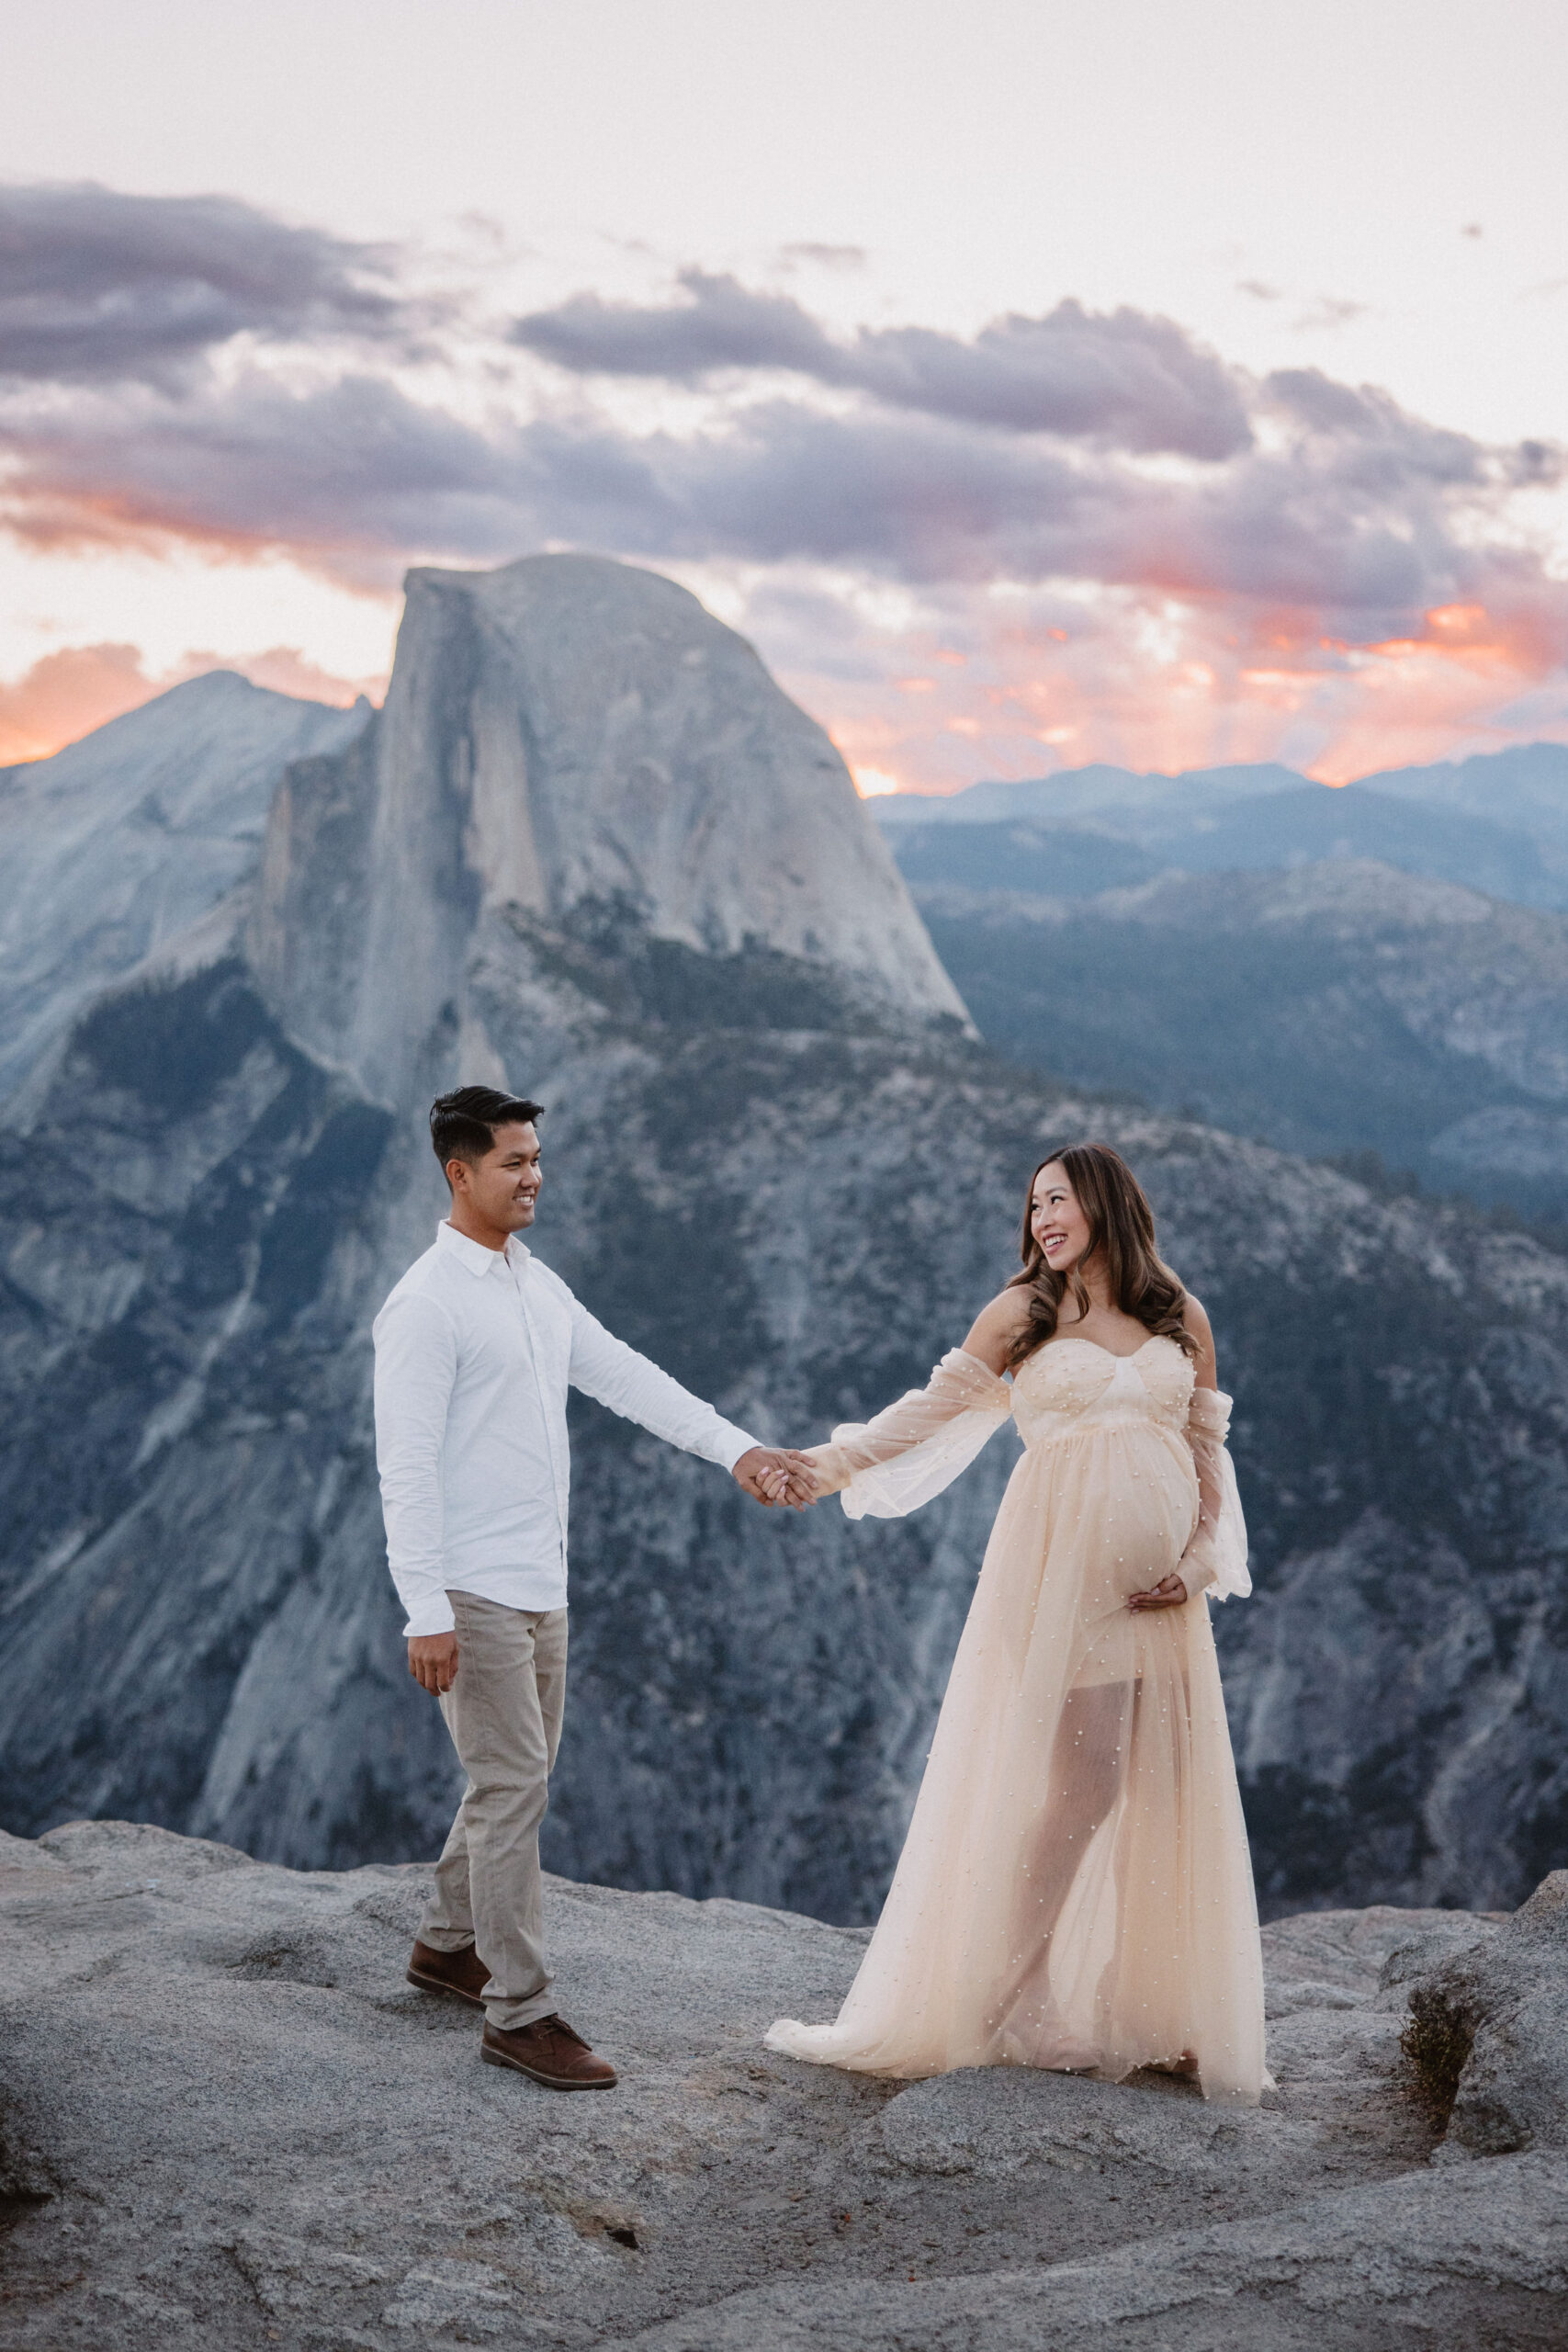 A pregnant woman in a beige dress stands thoughtfully on a rocky overlook, with yosemite valley's iconic cliffs and forests in the background at her maternity photoshoot